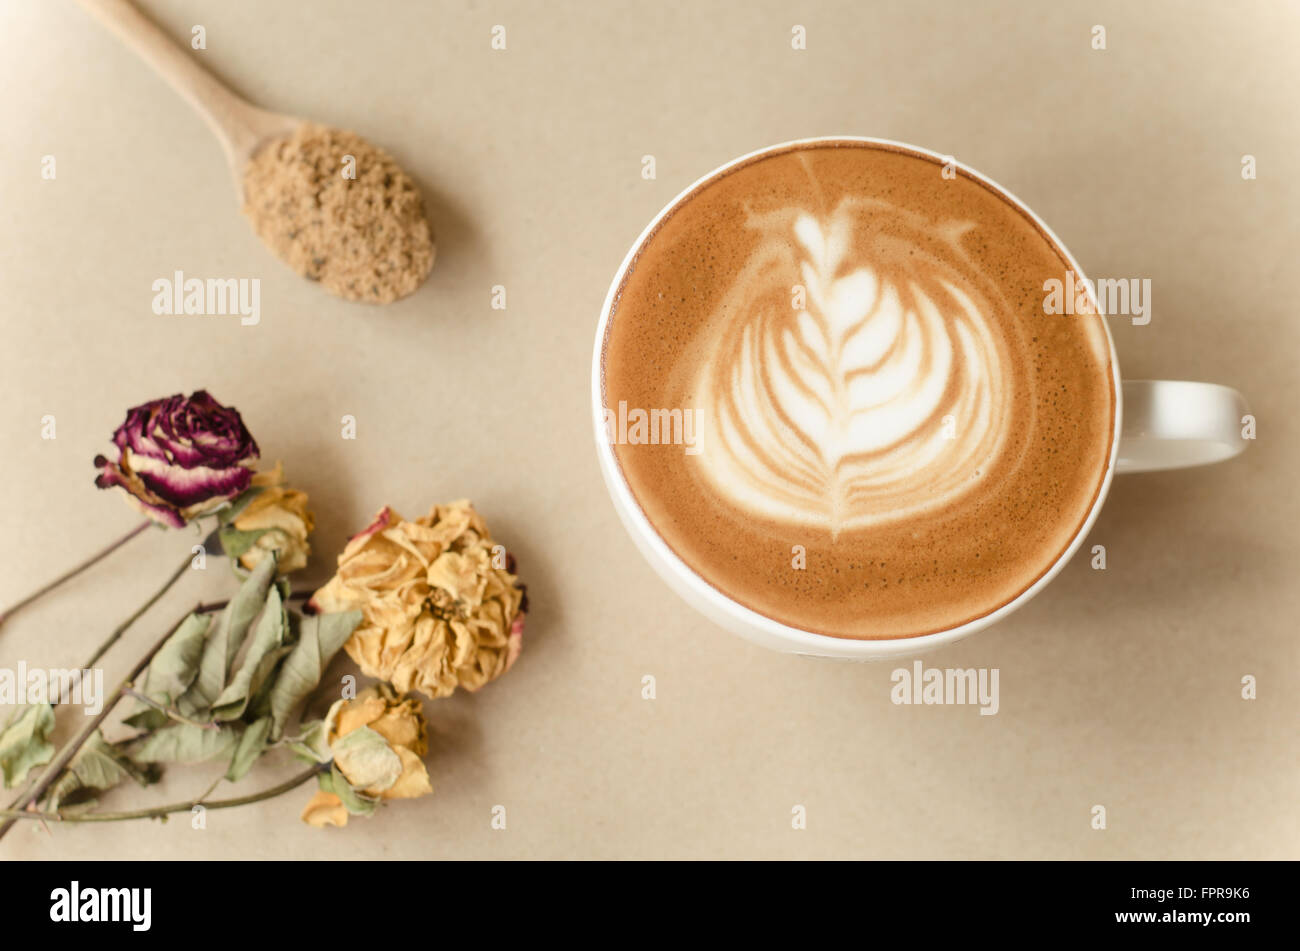 a cup of latte art on brow background, vintage coffee Stock Photo